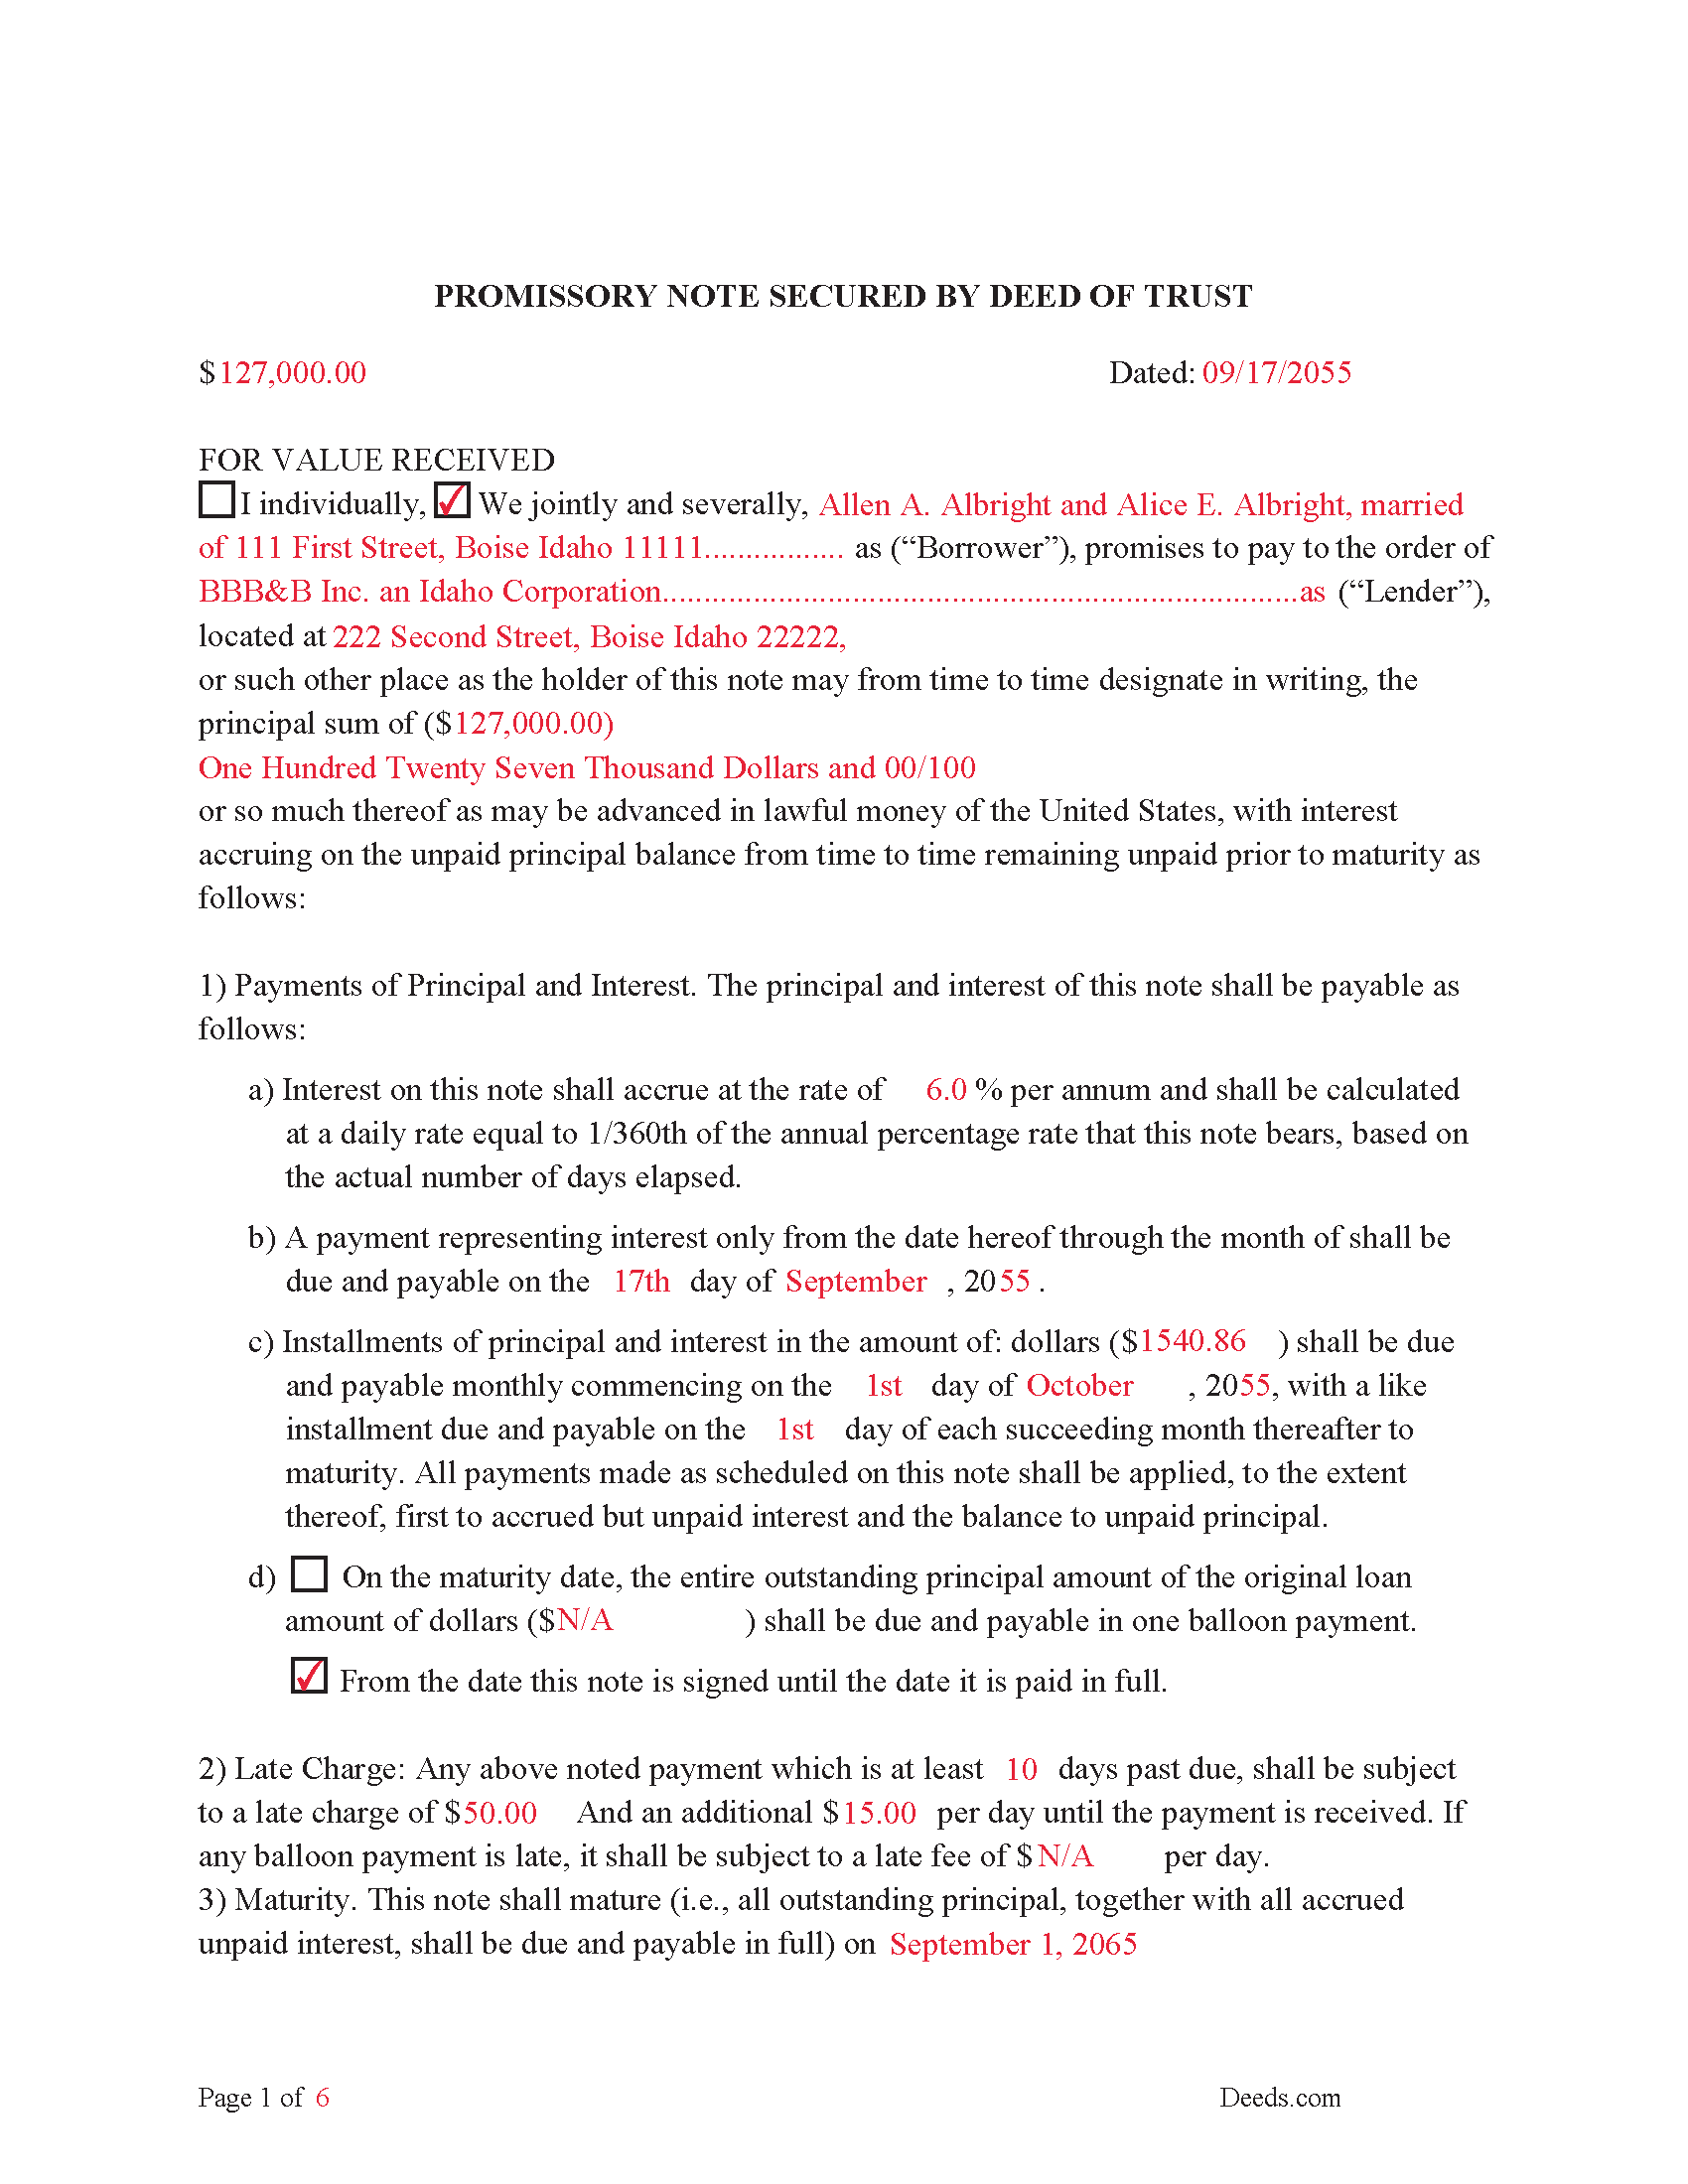 Completed Example of the Promissory Note Document